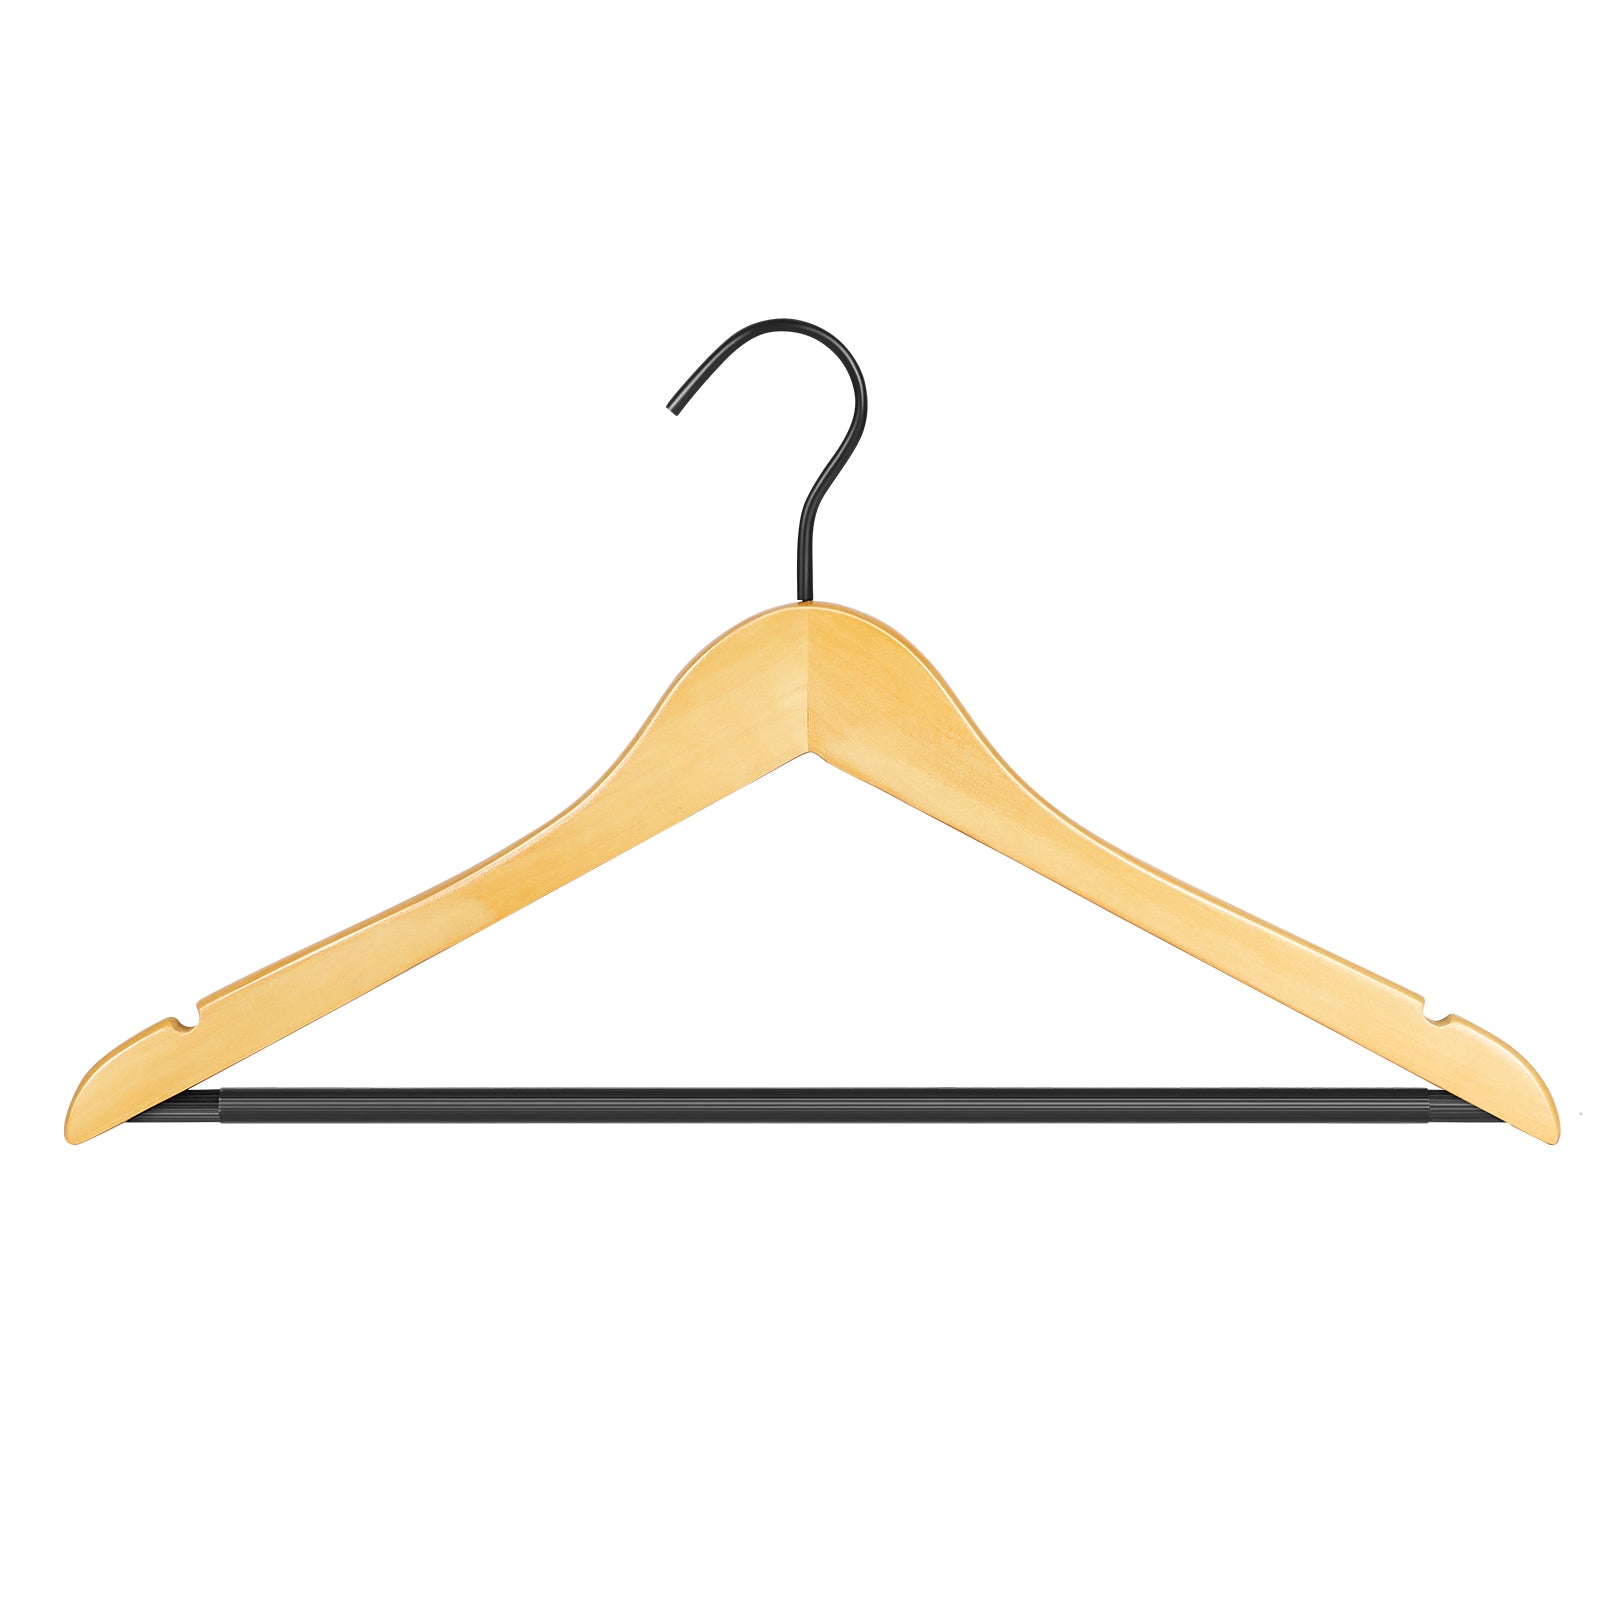 Perfecasa Premium Wooden Clothes Hangers 20 Pack, Coat Hangers with Noise  Canceling Hook, Shirt Hangers, Heady Duty Wood Hangers, Non Slip Coated  Pant